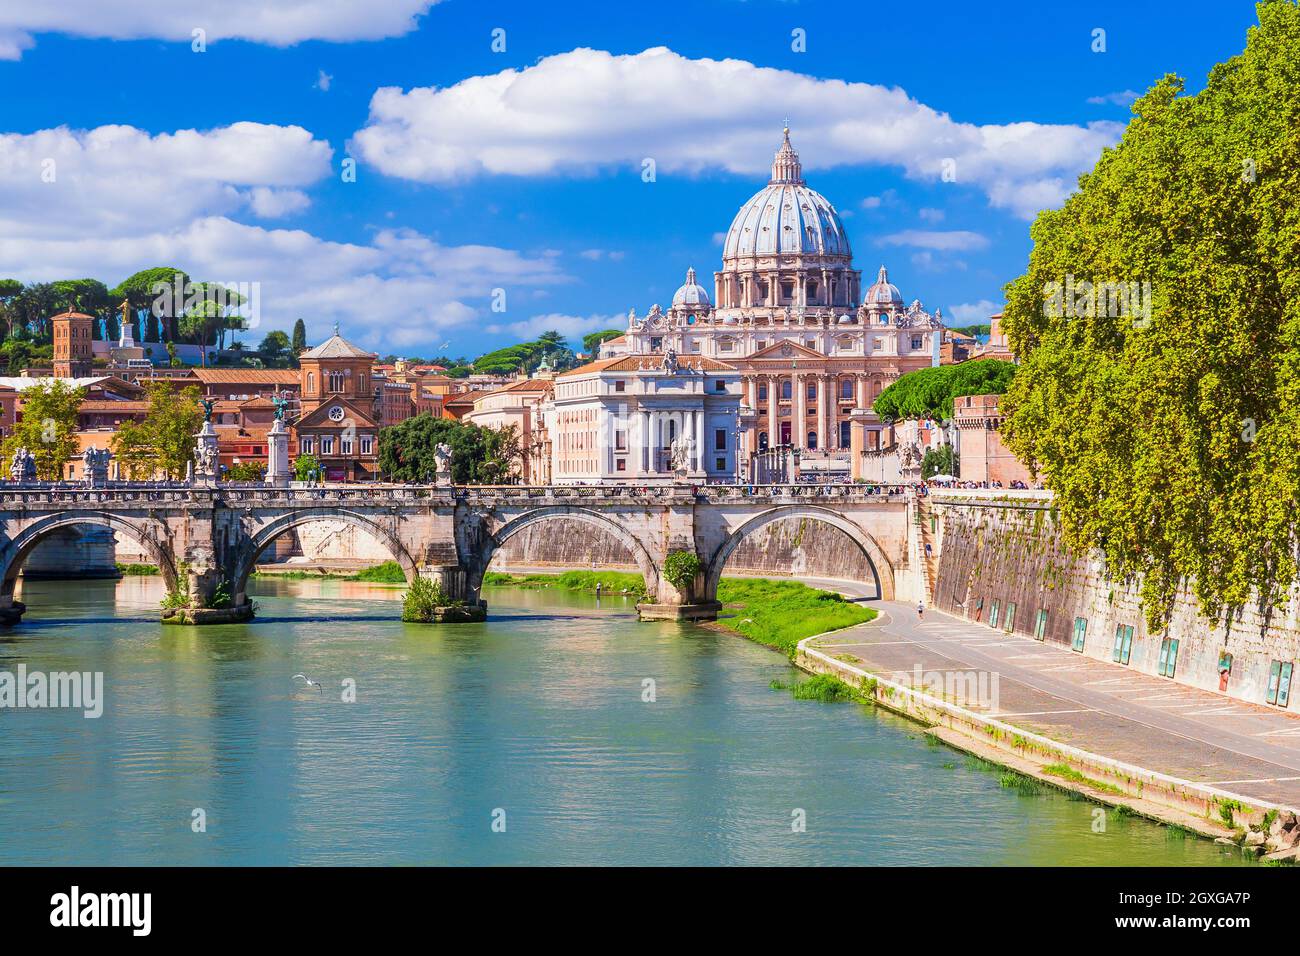 Vatican City. St. Peter's Basilica and Ponte St. Angelo in Rome, Italy. Stock Photo